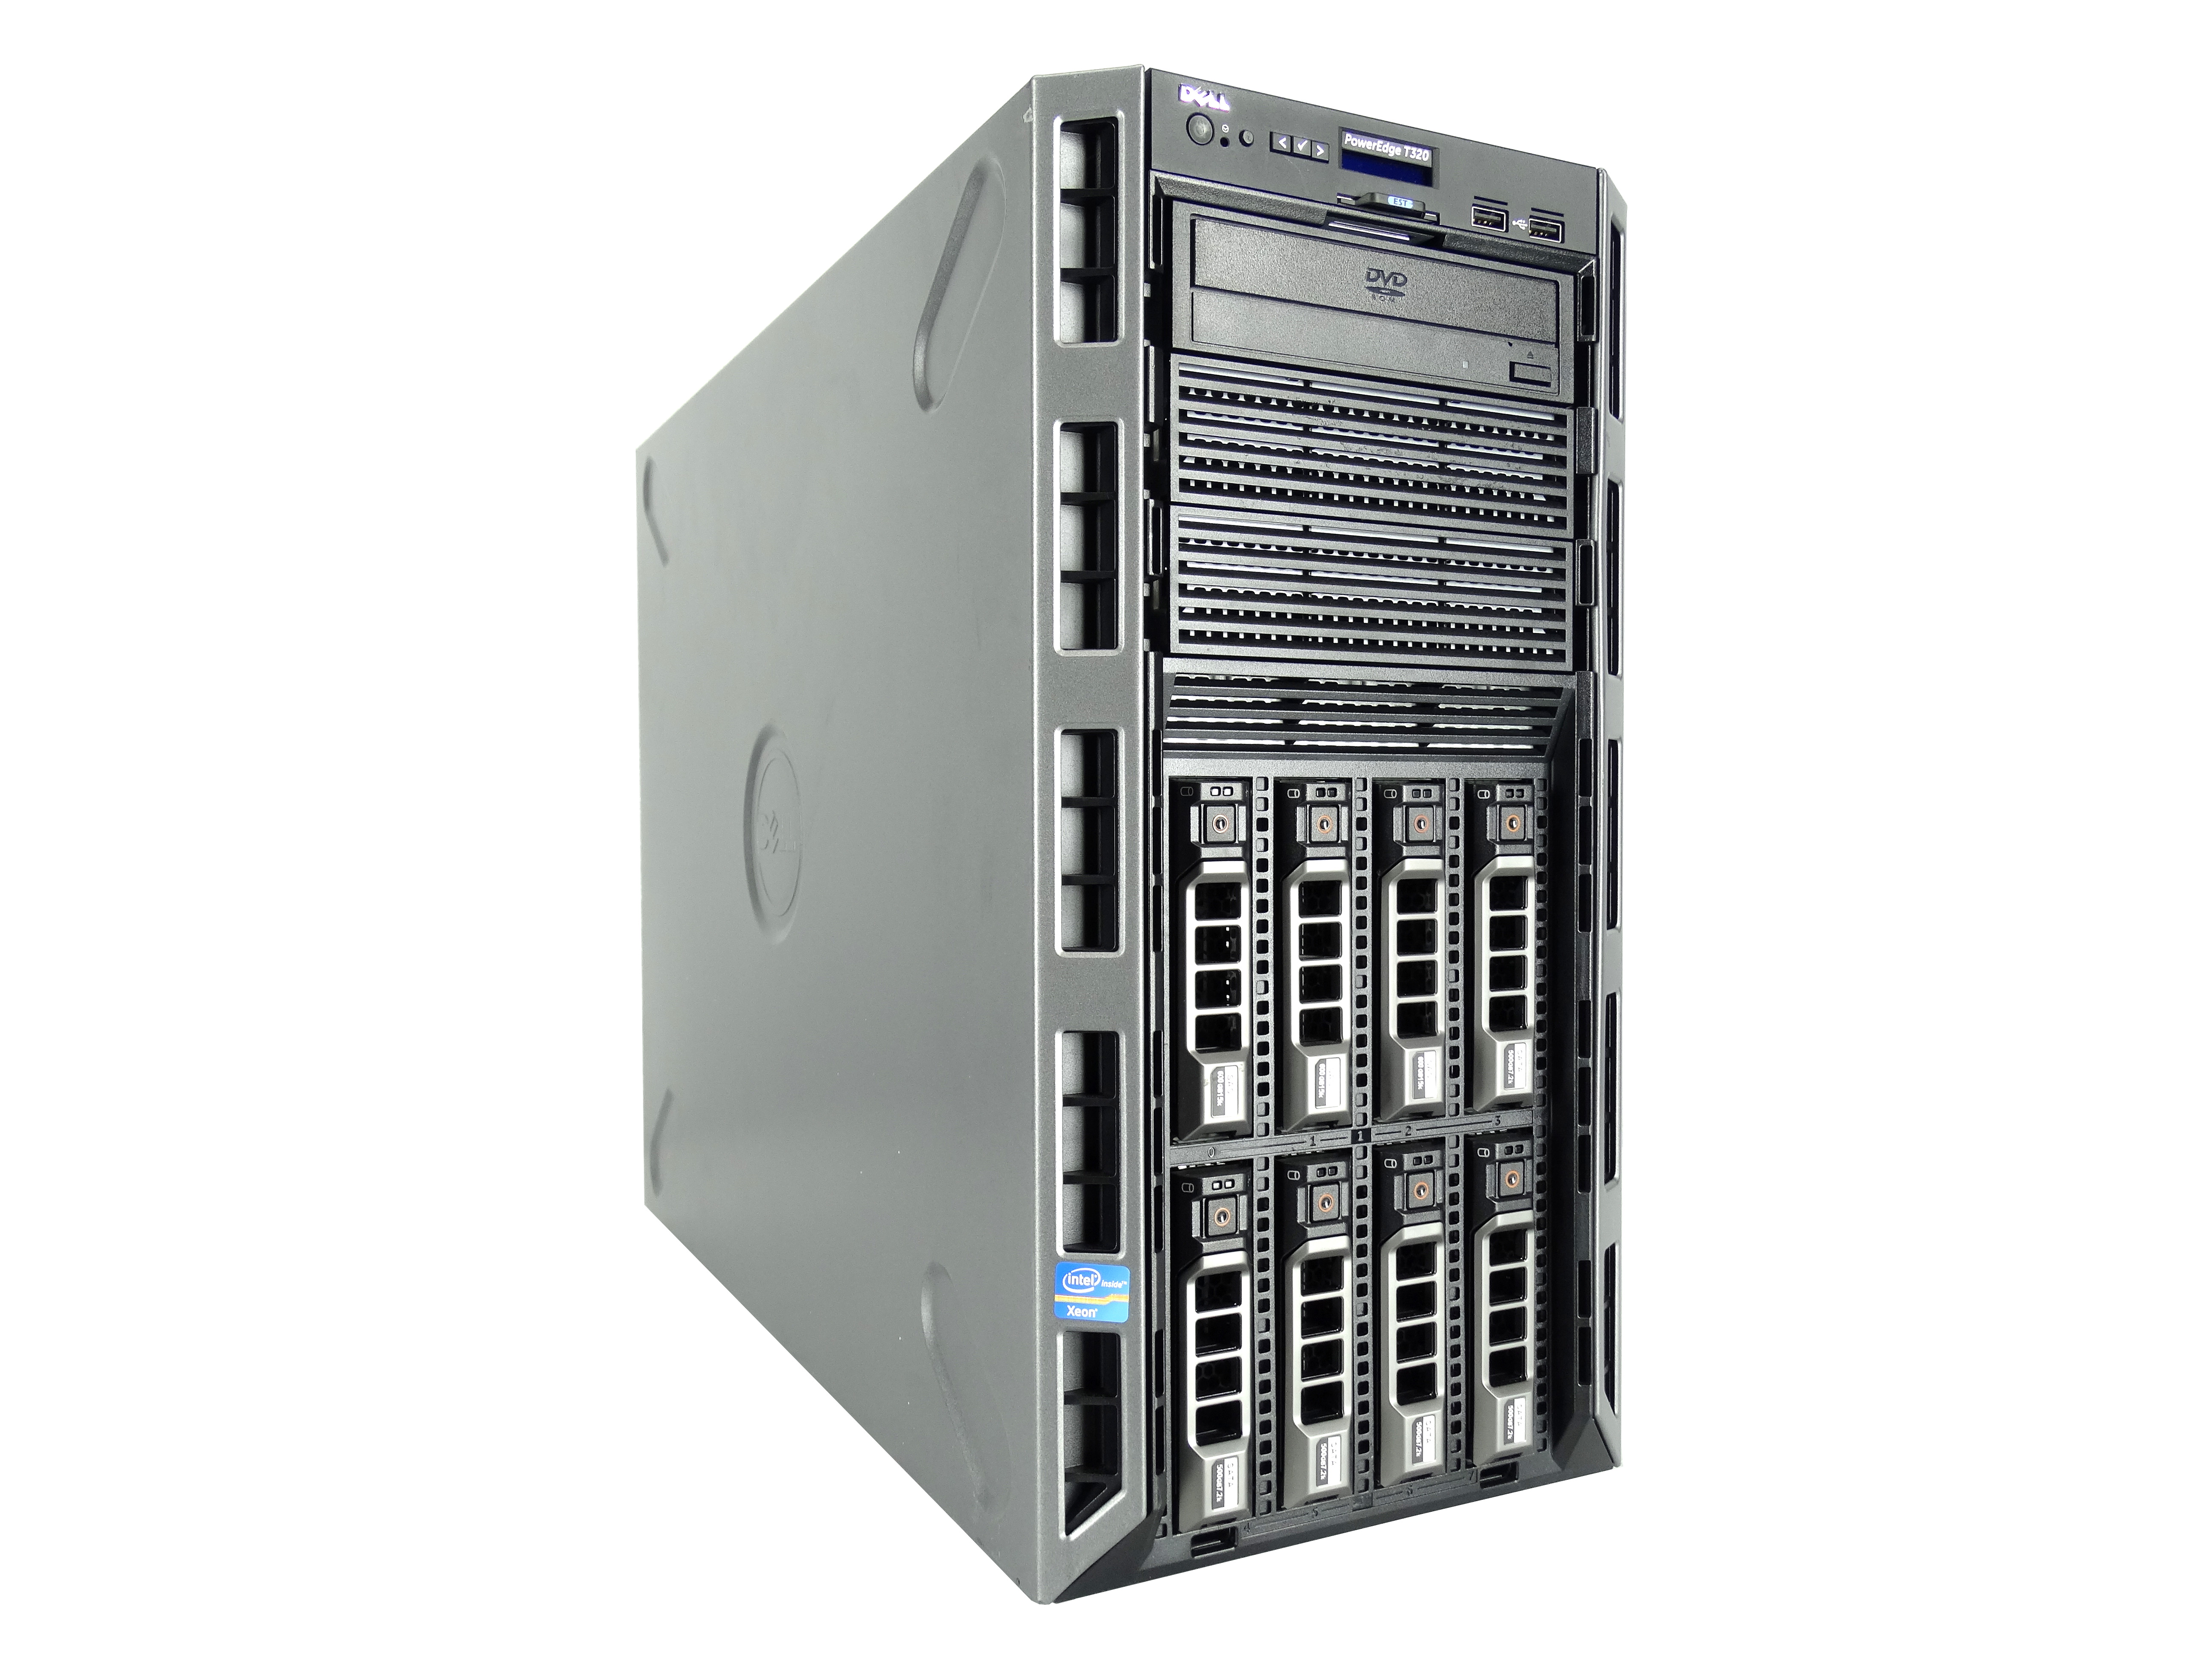 Dell PowerEdge T320, 1x Xeon E5-2470 2.3GHz Eight Core Processor, 64GB DDR3 Memory, 8x 2TB 7.2K 3.5" SATA Hard Drives, PERC H700 Controller, 2x Power Supplies (Used) - image 2 of 3